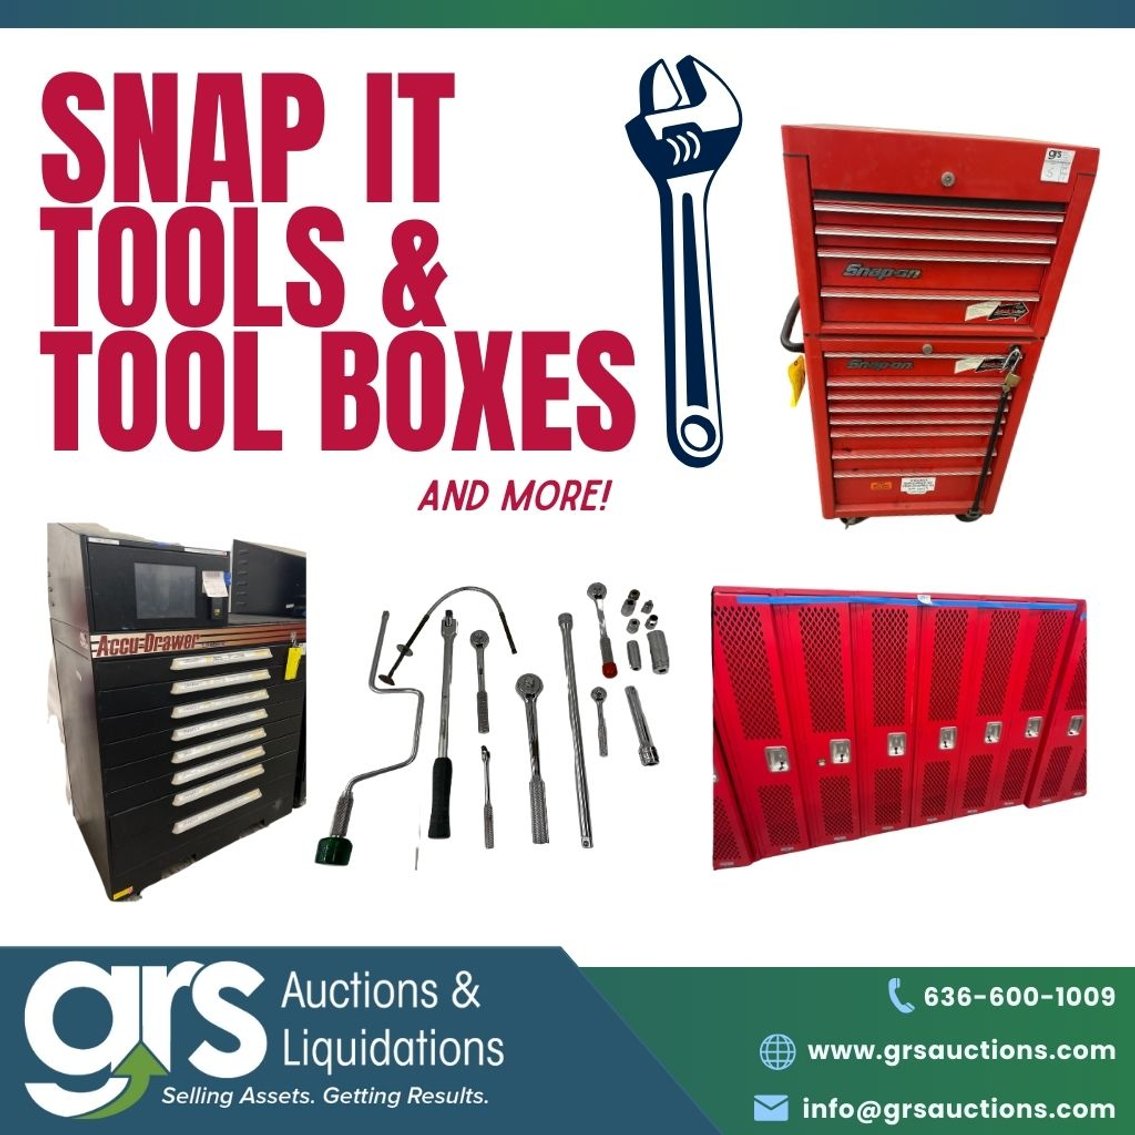 Snap It Tools, Tools Boxes....and more from Boeing!